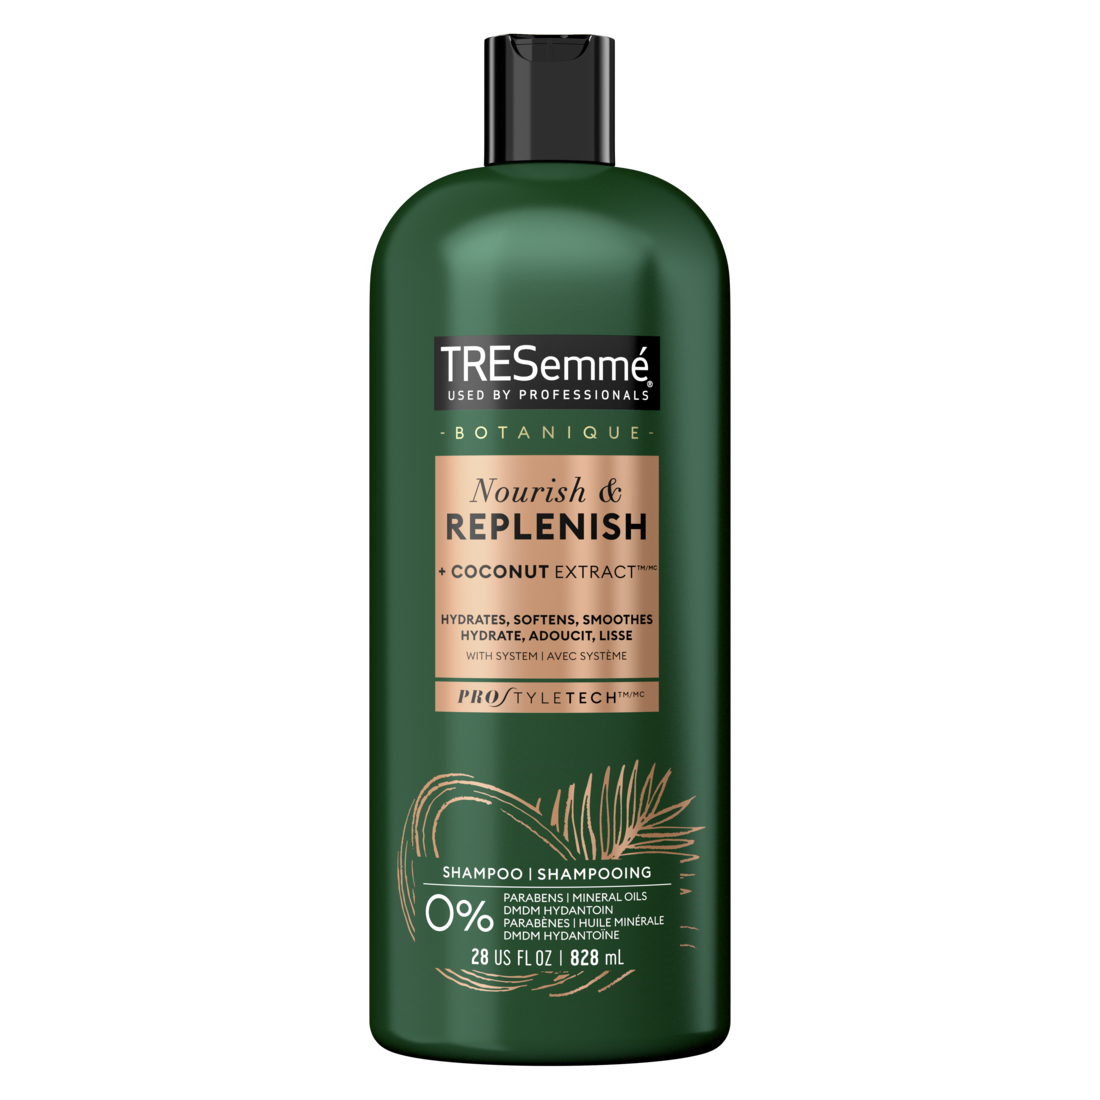 TRESemmé Botanique Nourish & Replenish Shampoo for Dry Hair + Coconut Extract formulated with Pro Style Technology™ 828 ml